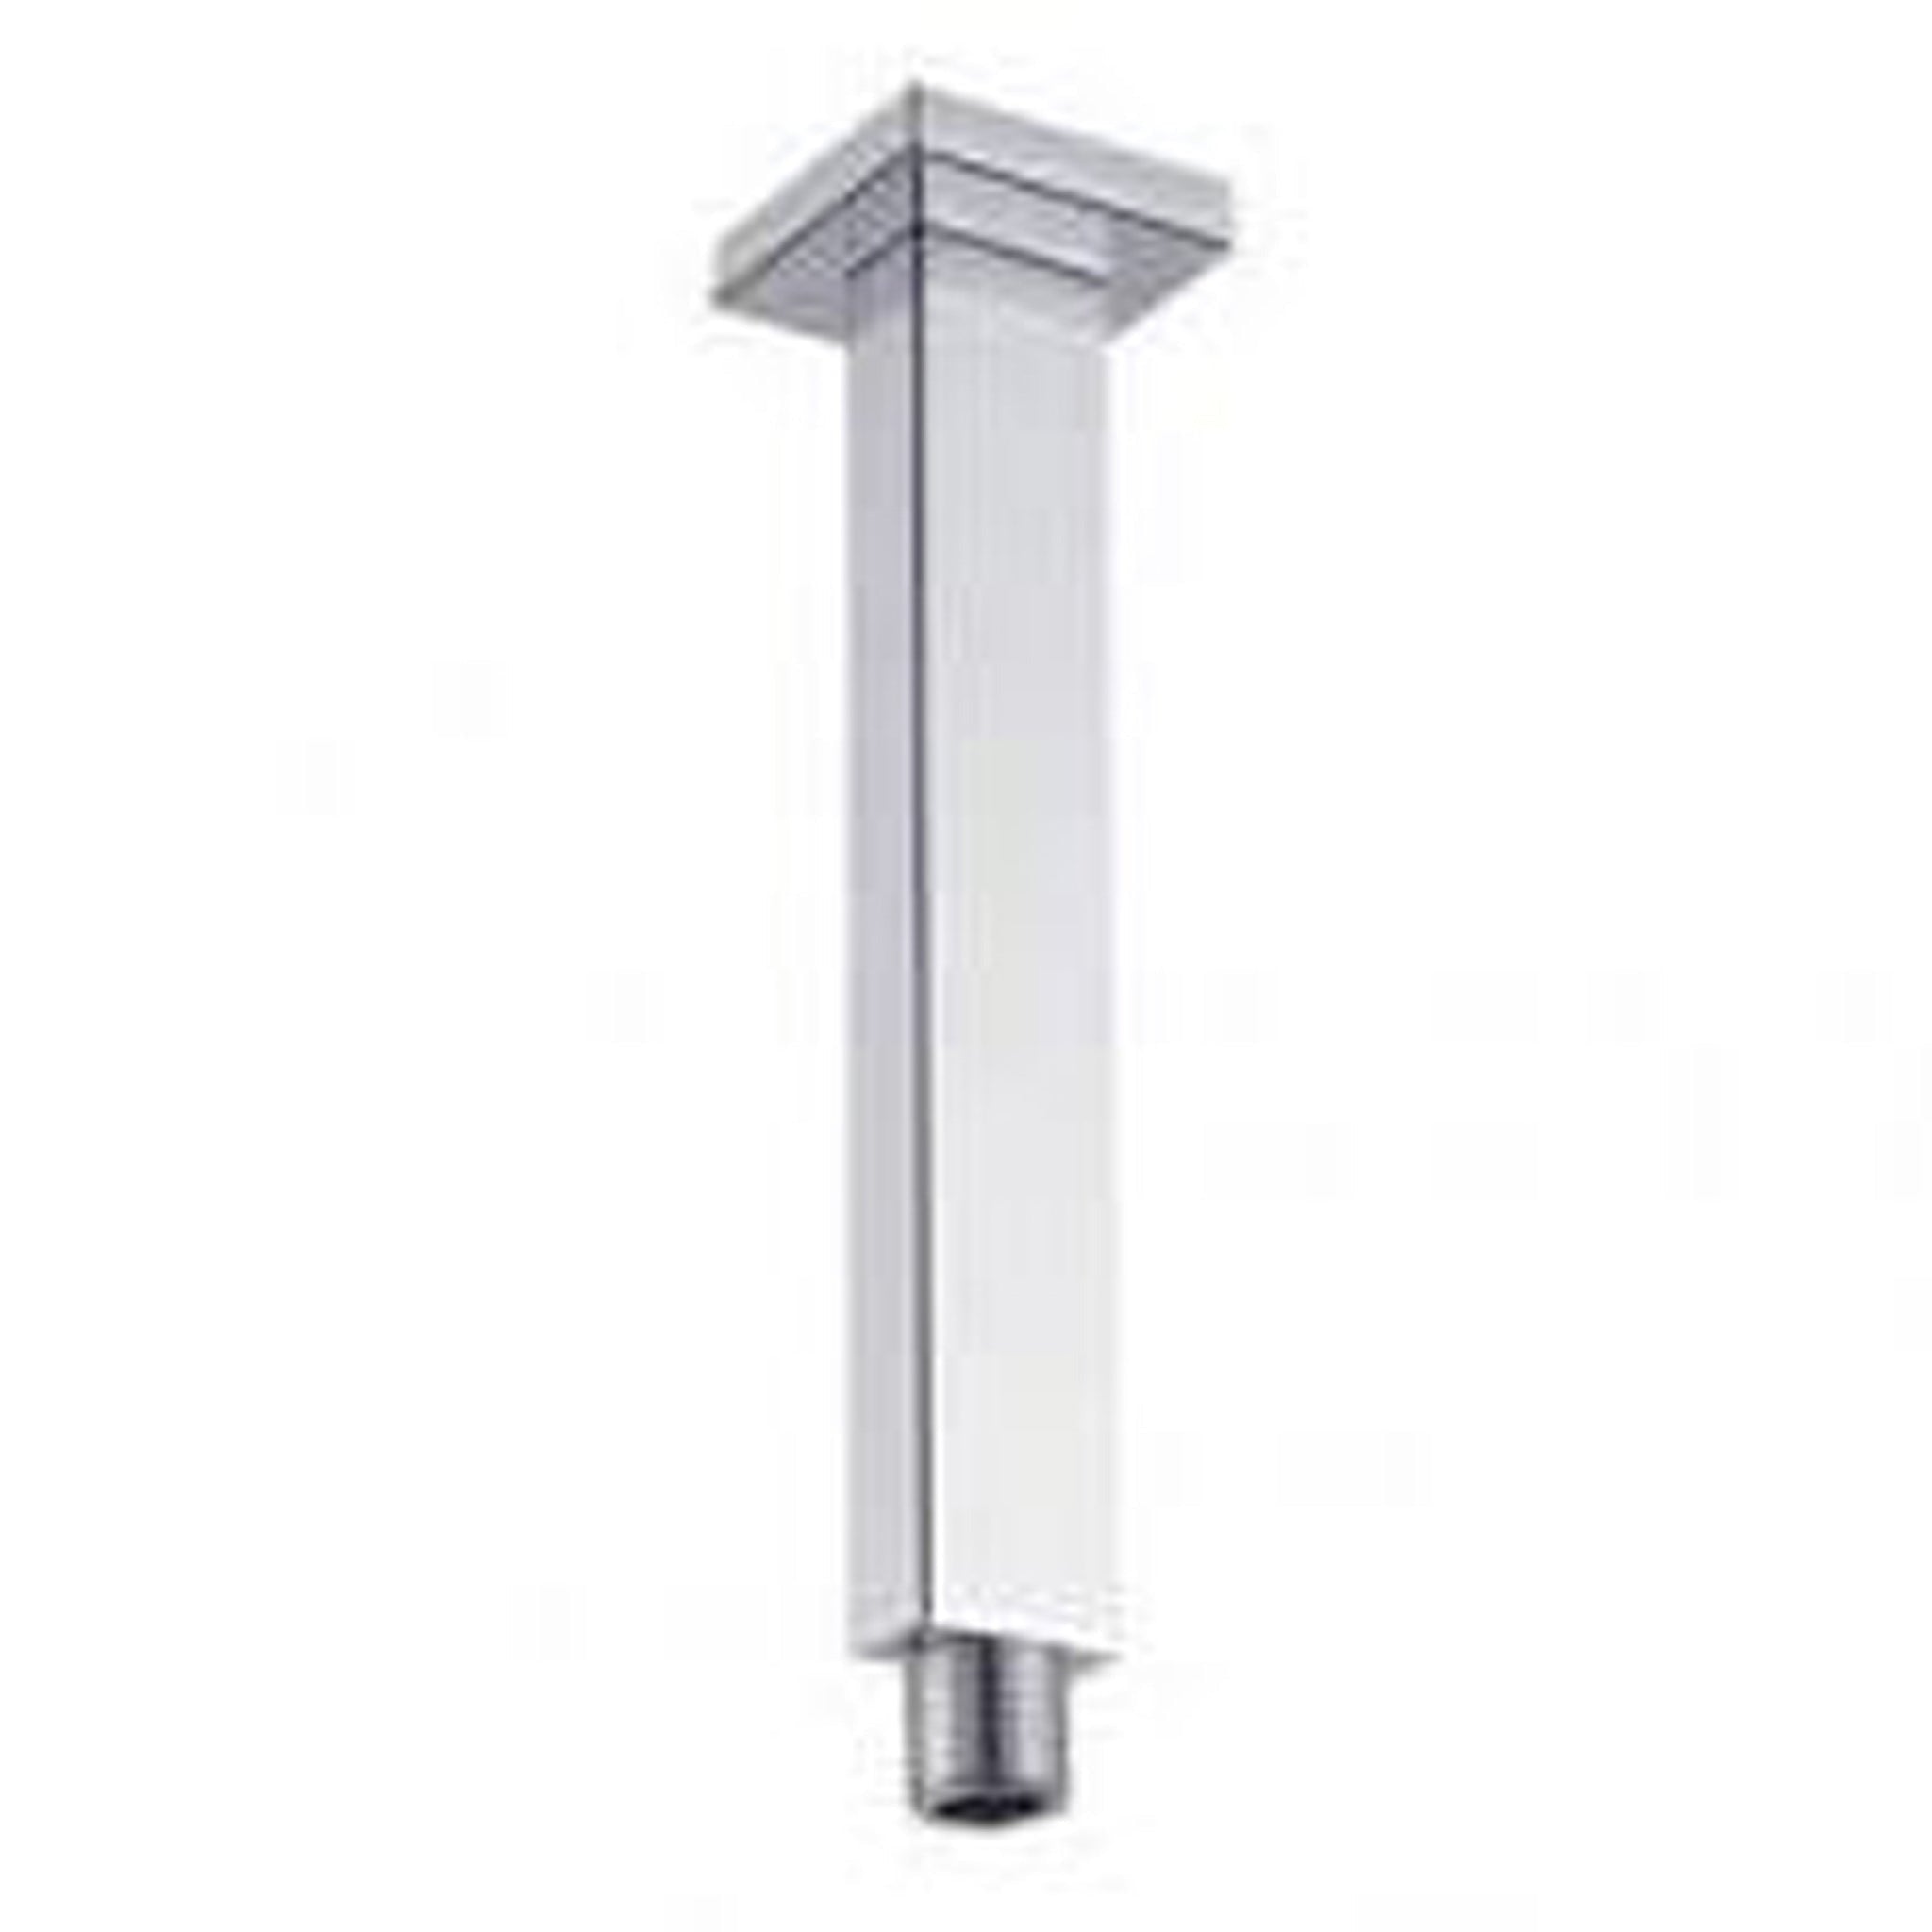 Aquamoon 4" Shower arm Ceiling Square Chrome with Flange